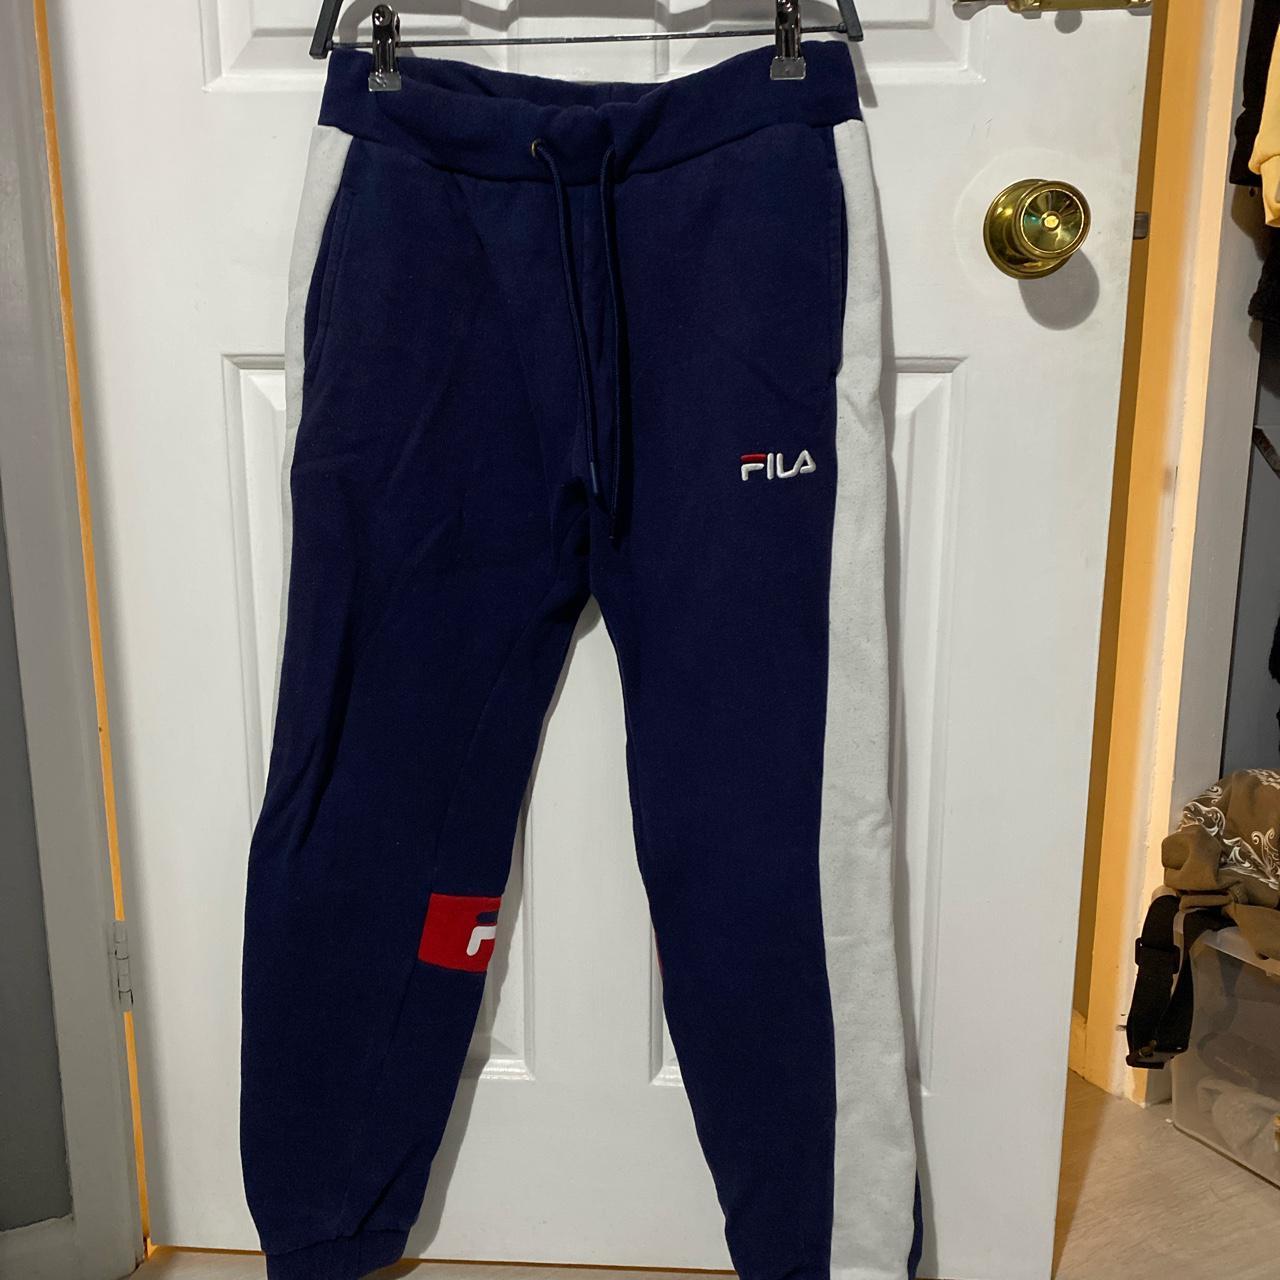 Fila Men's Navy and White Joggers-tracksuits | Depop